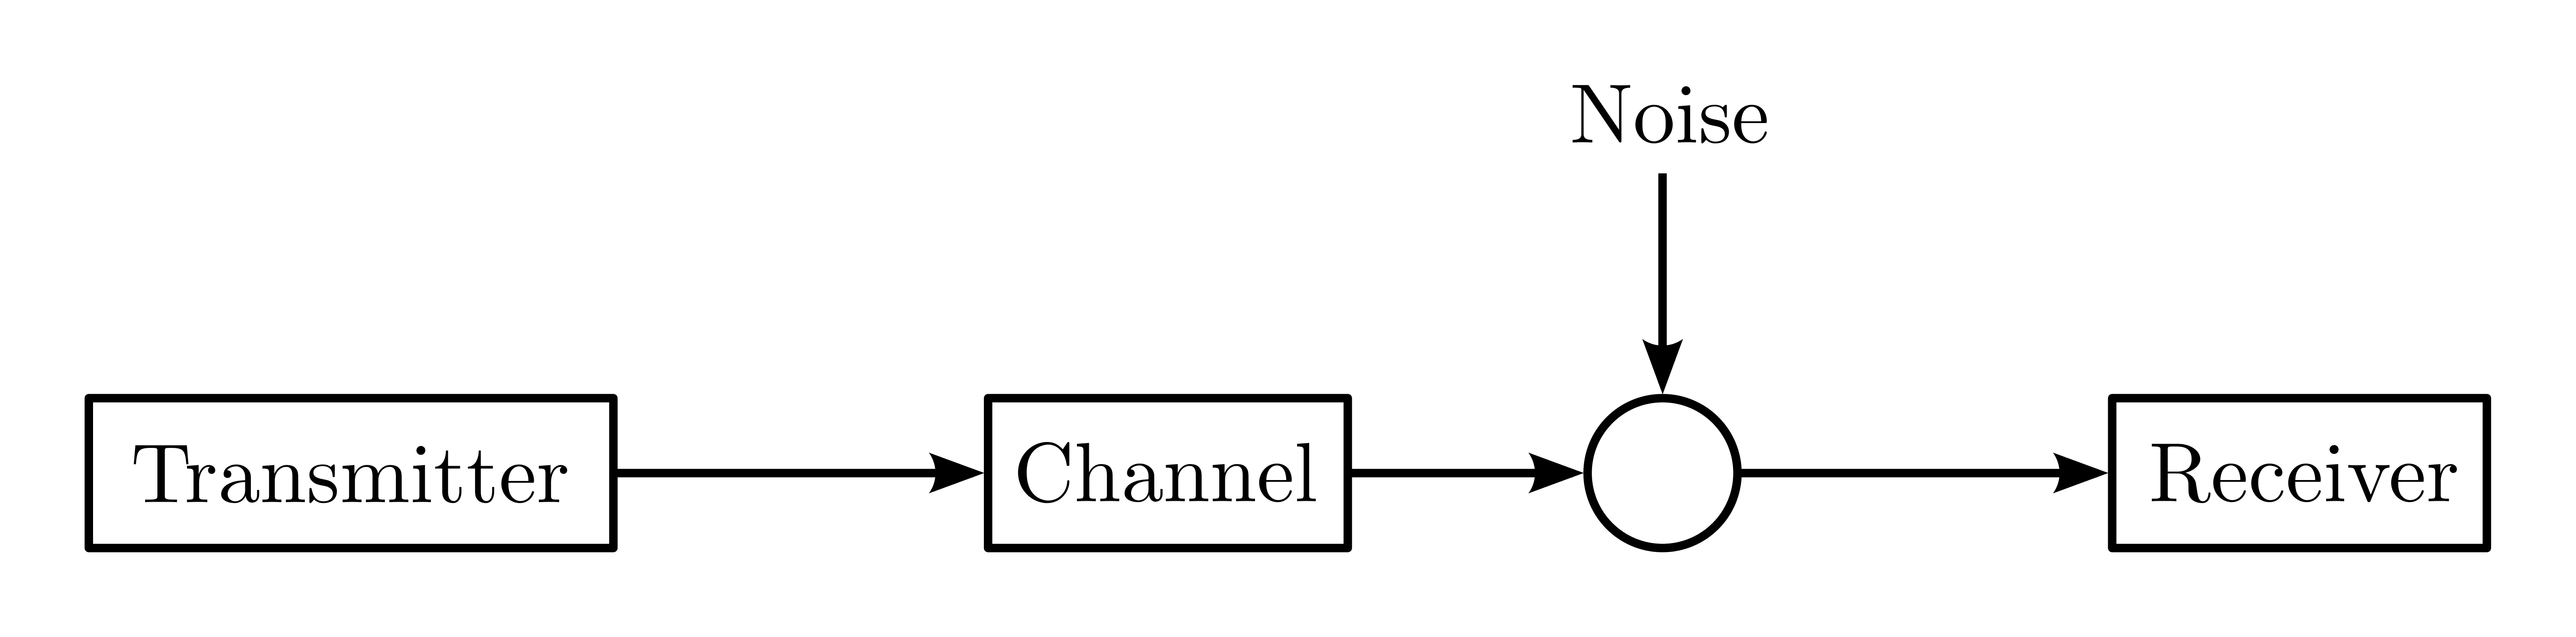 File:Communication-System.png - Wikimedia Commons